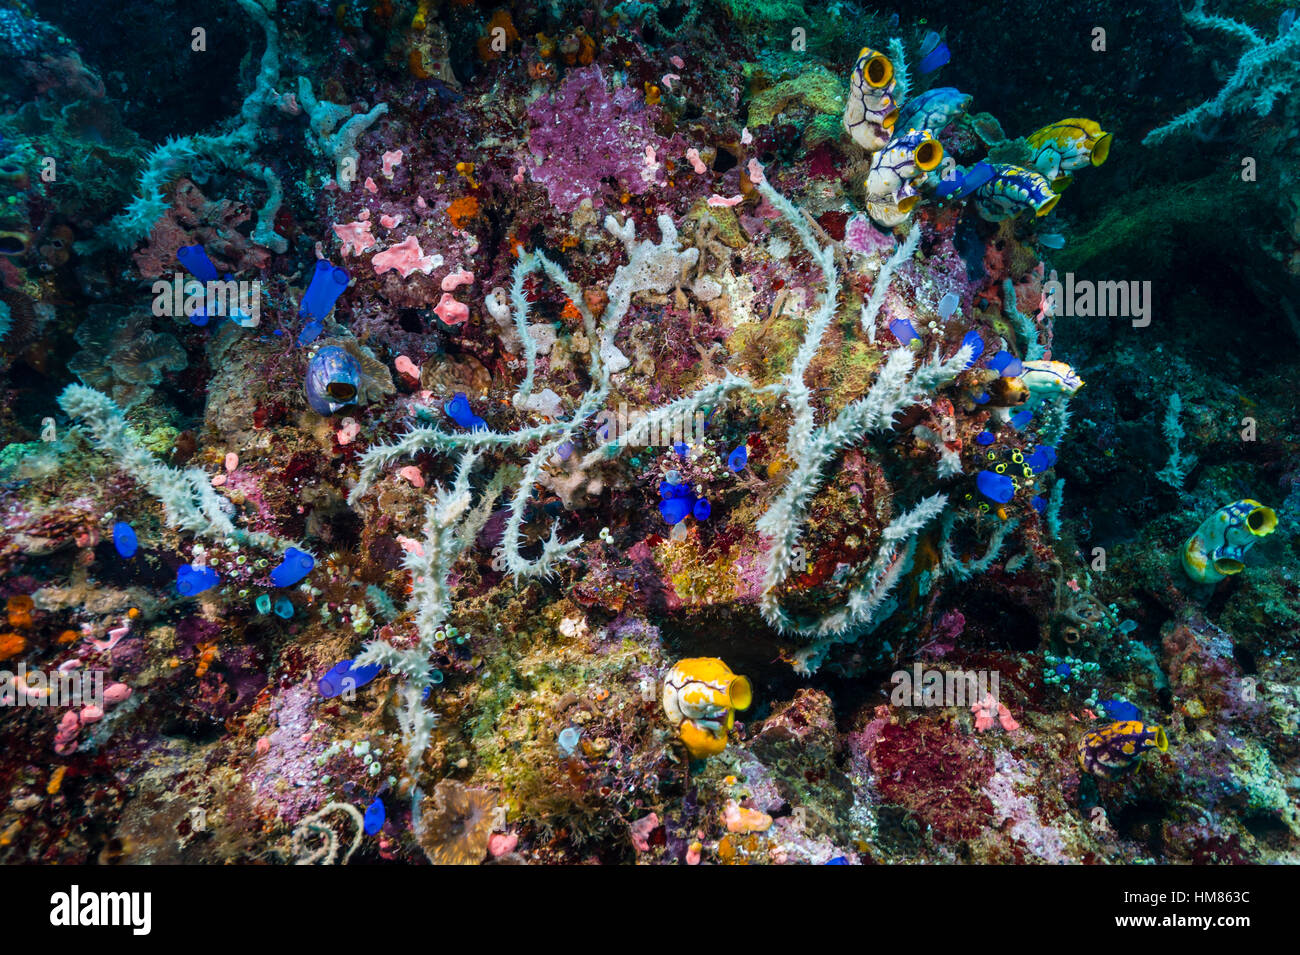 A colony of iridescent blue Sea Squirts and tunicates amongst tubular sponges on a colorful soft coral reef wall. Stock Photo